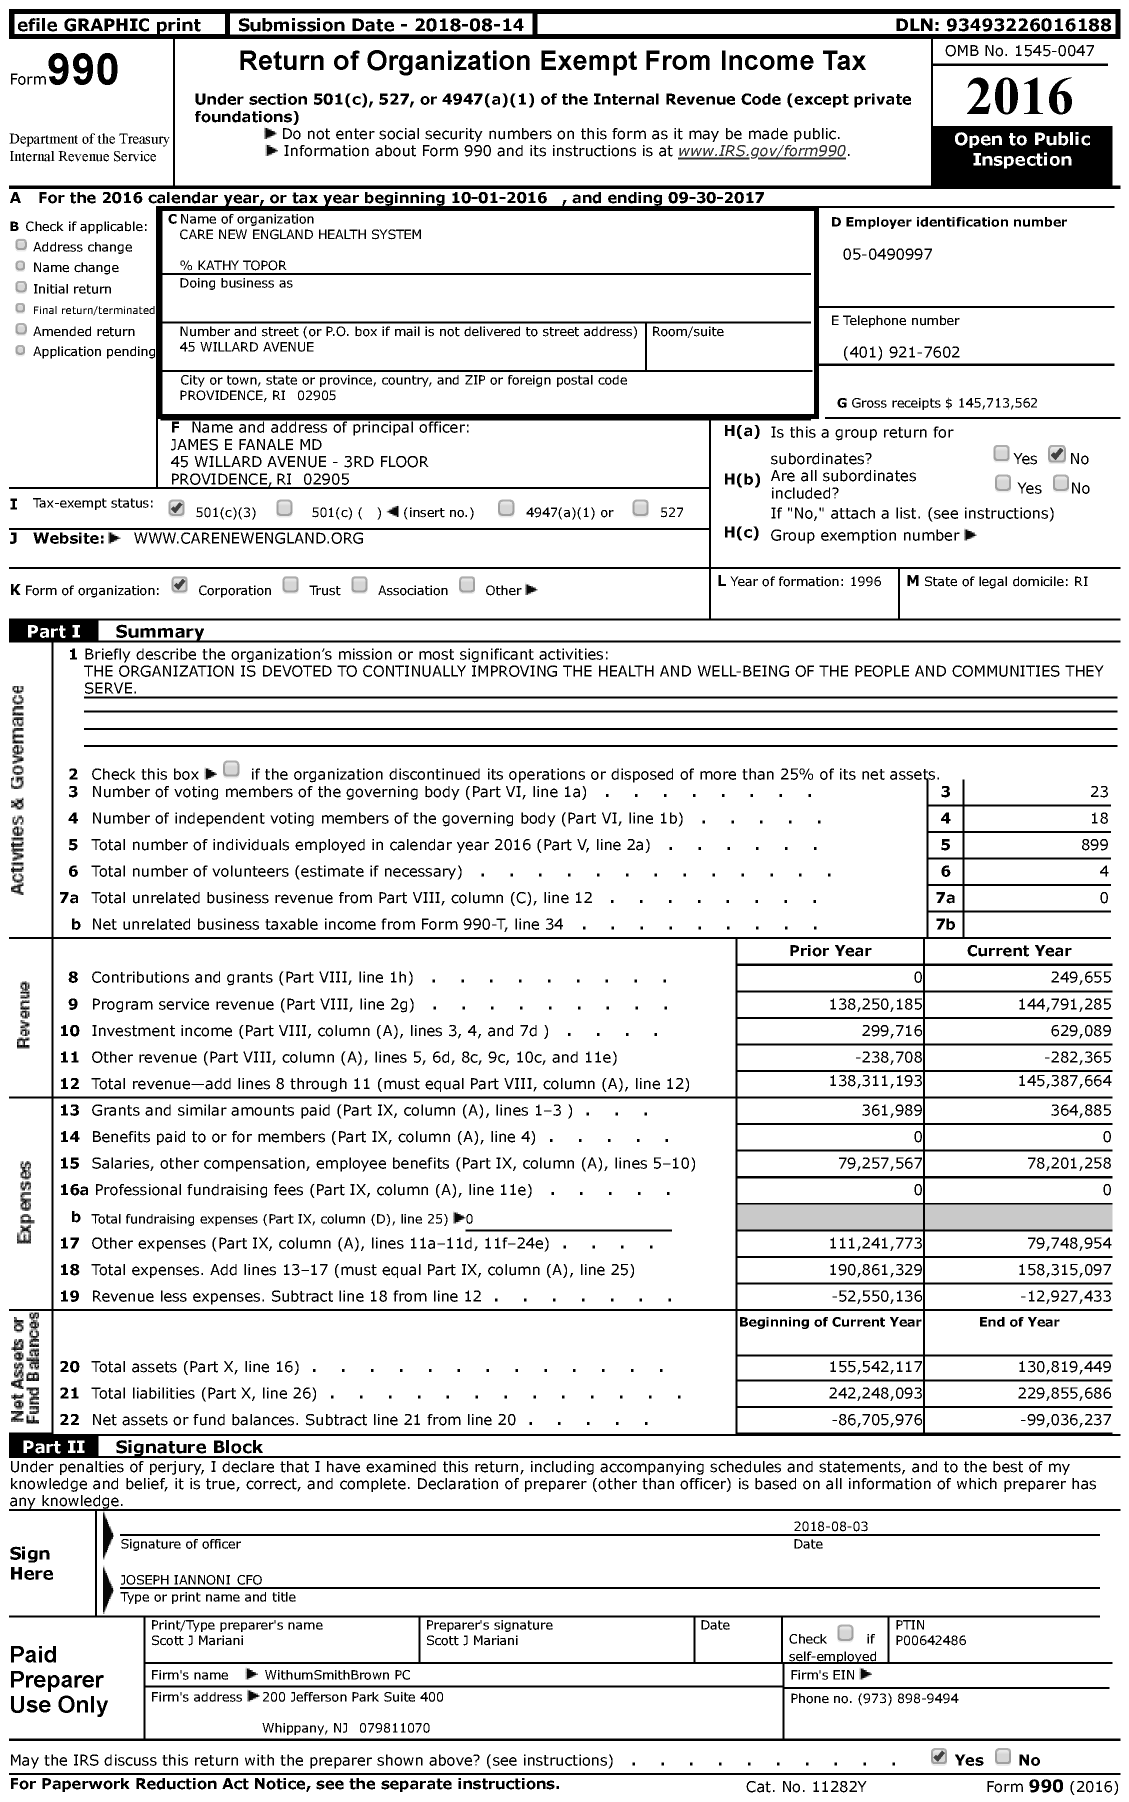 Image of first page of 2016 Form 990 for Care New England Health System (CNE)